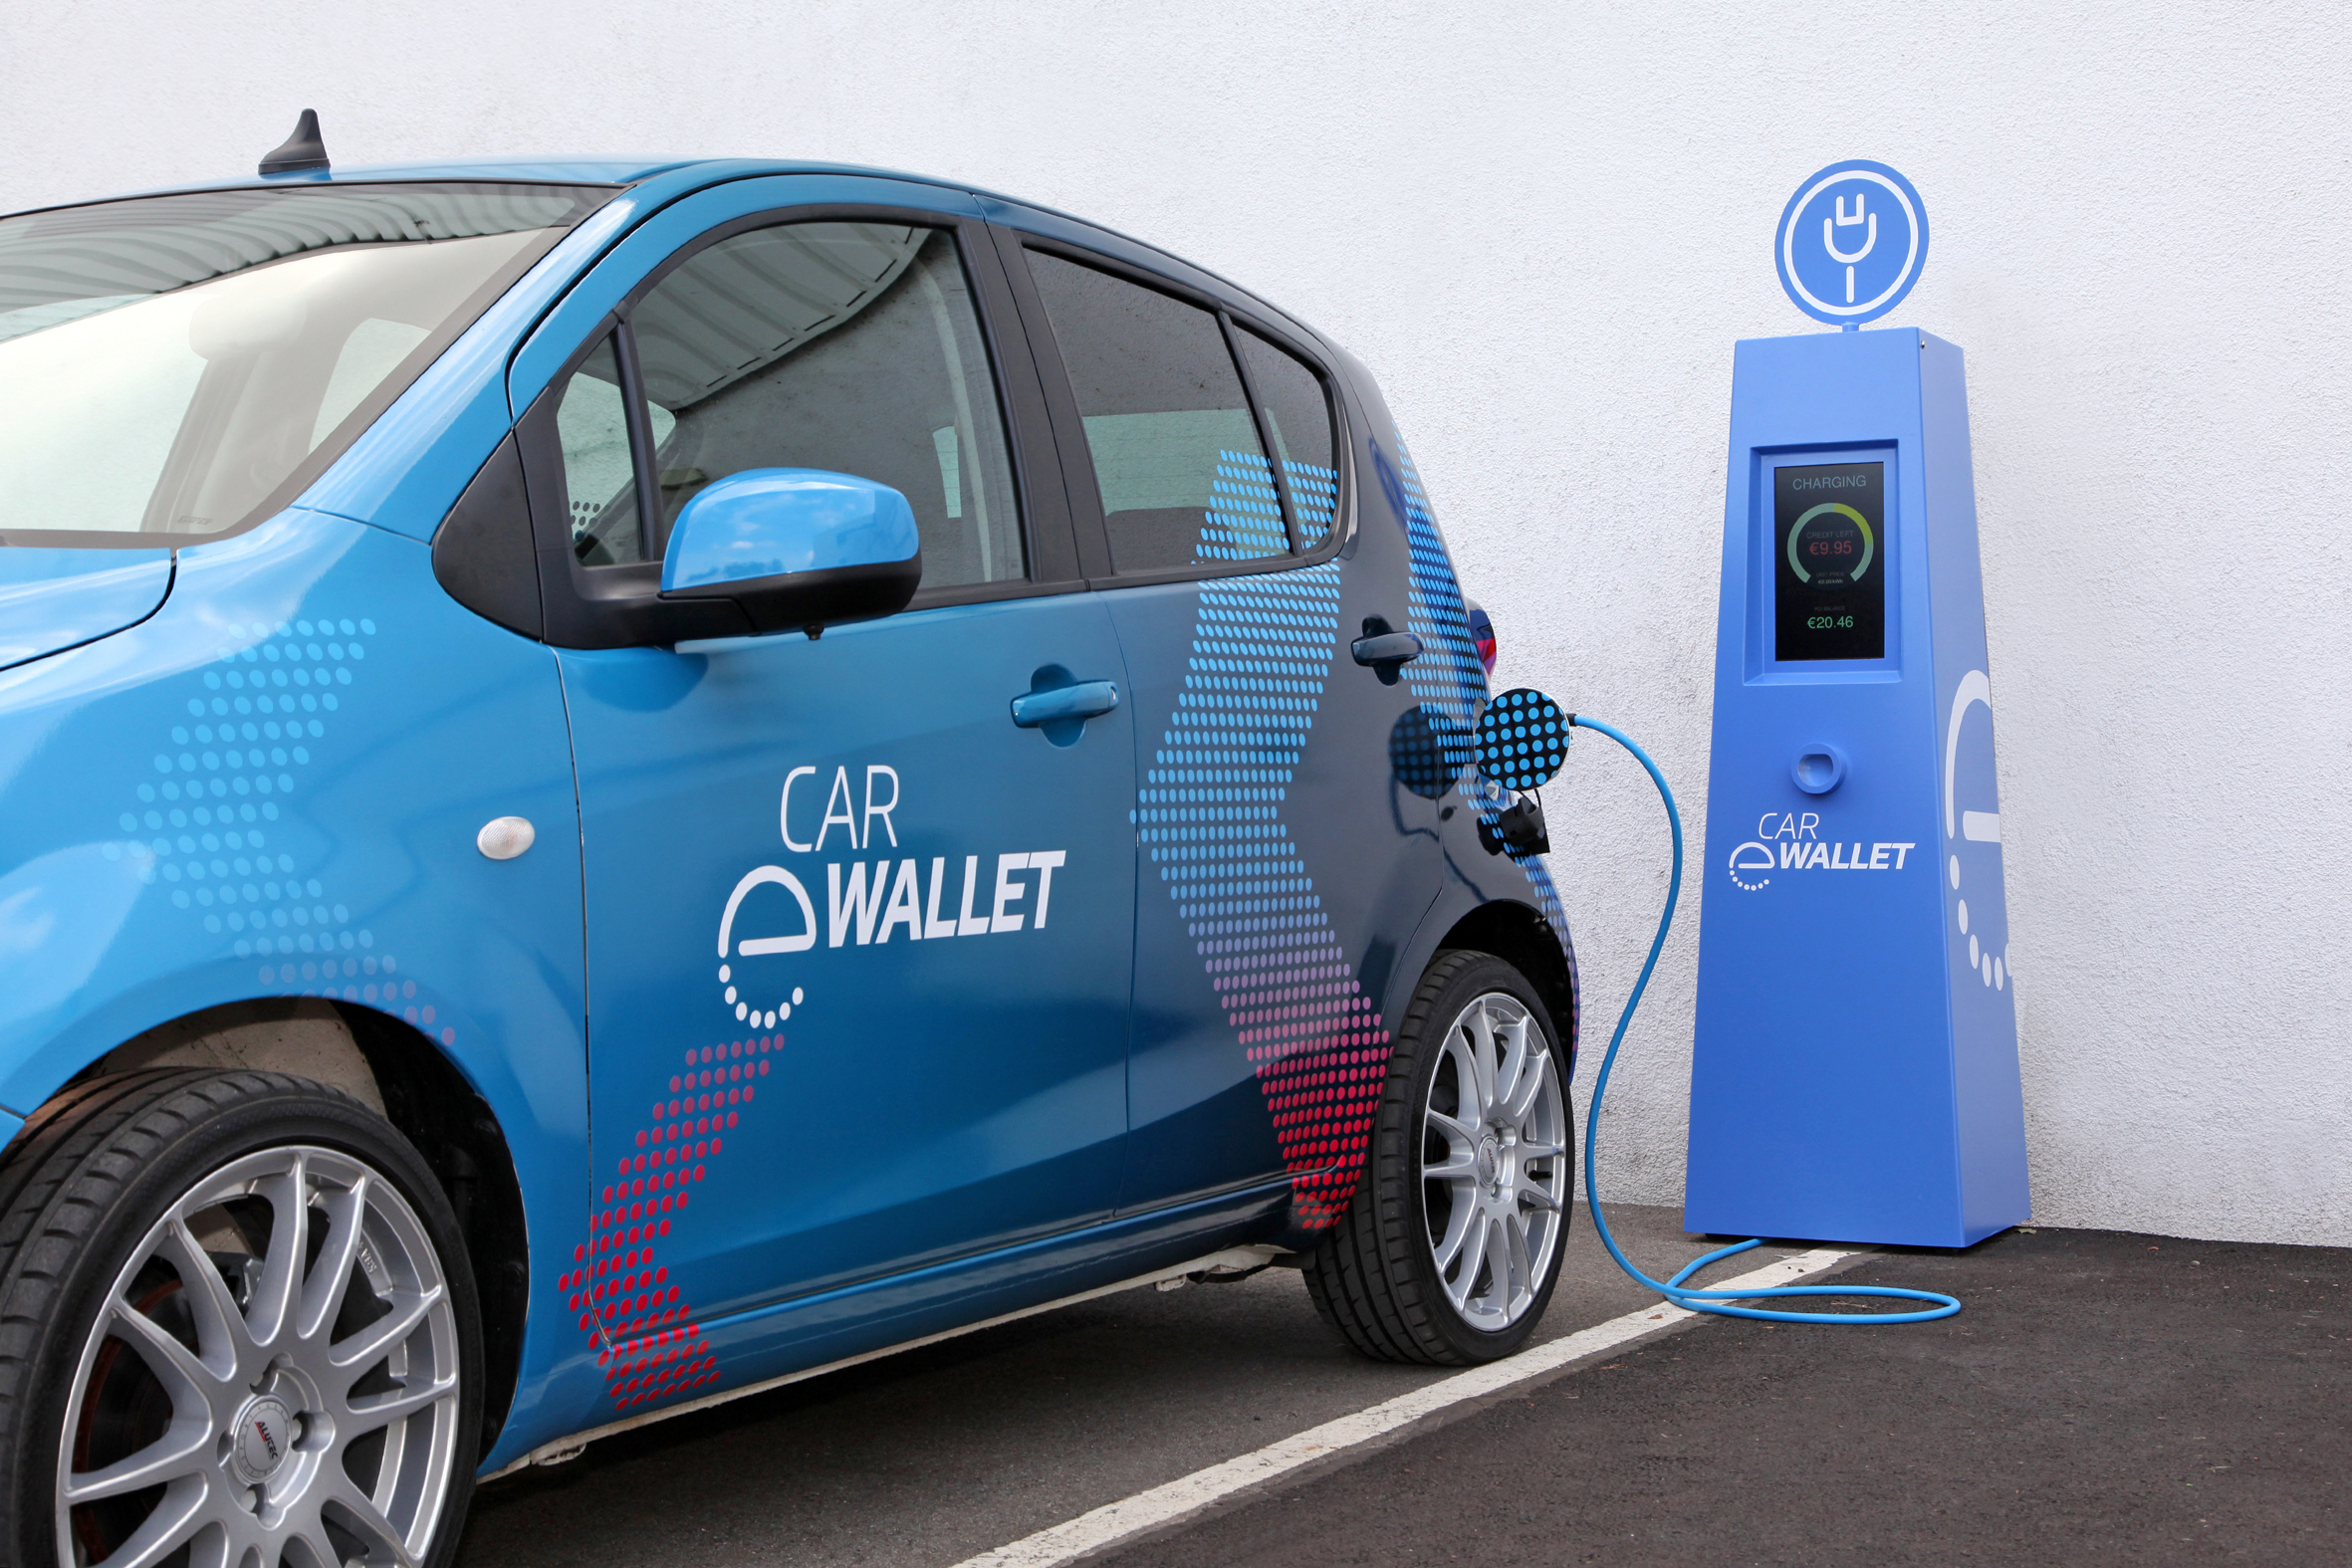 Car eWallet Is The Response To A Self-Driving Future